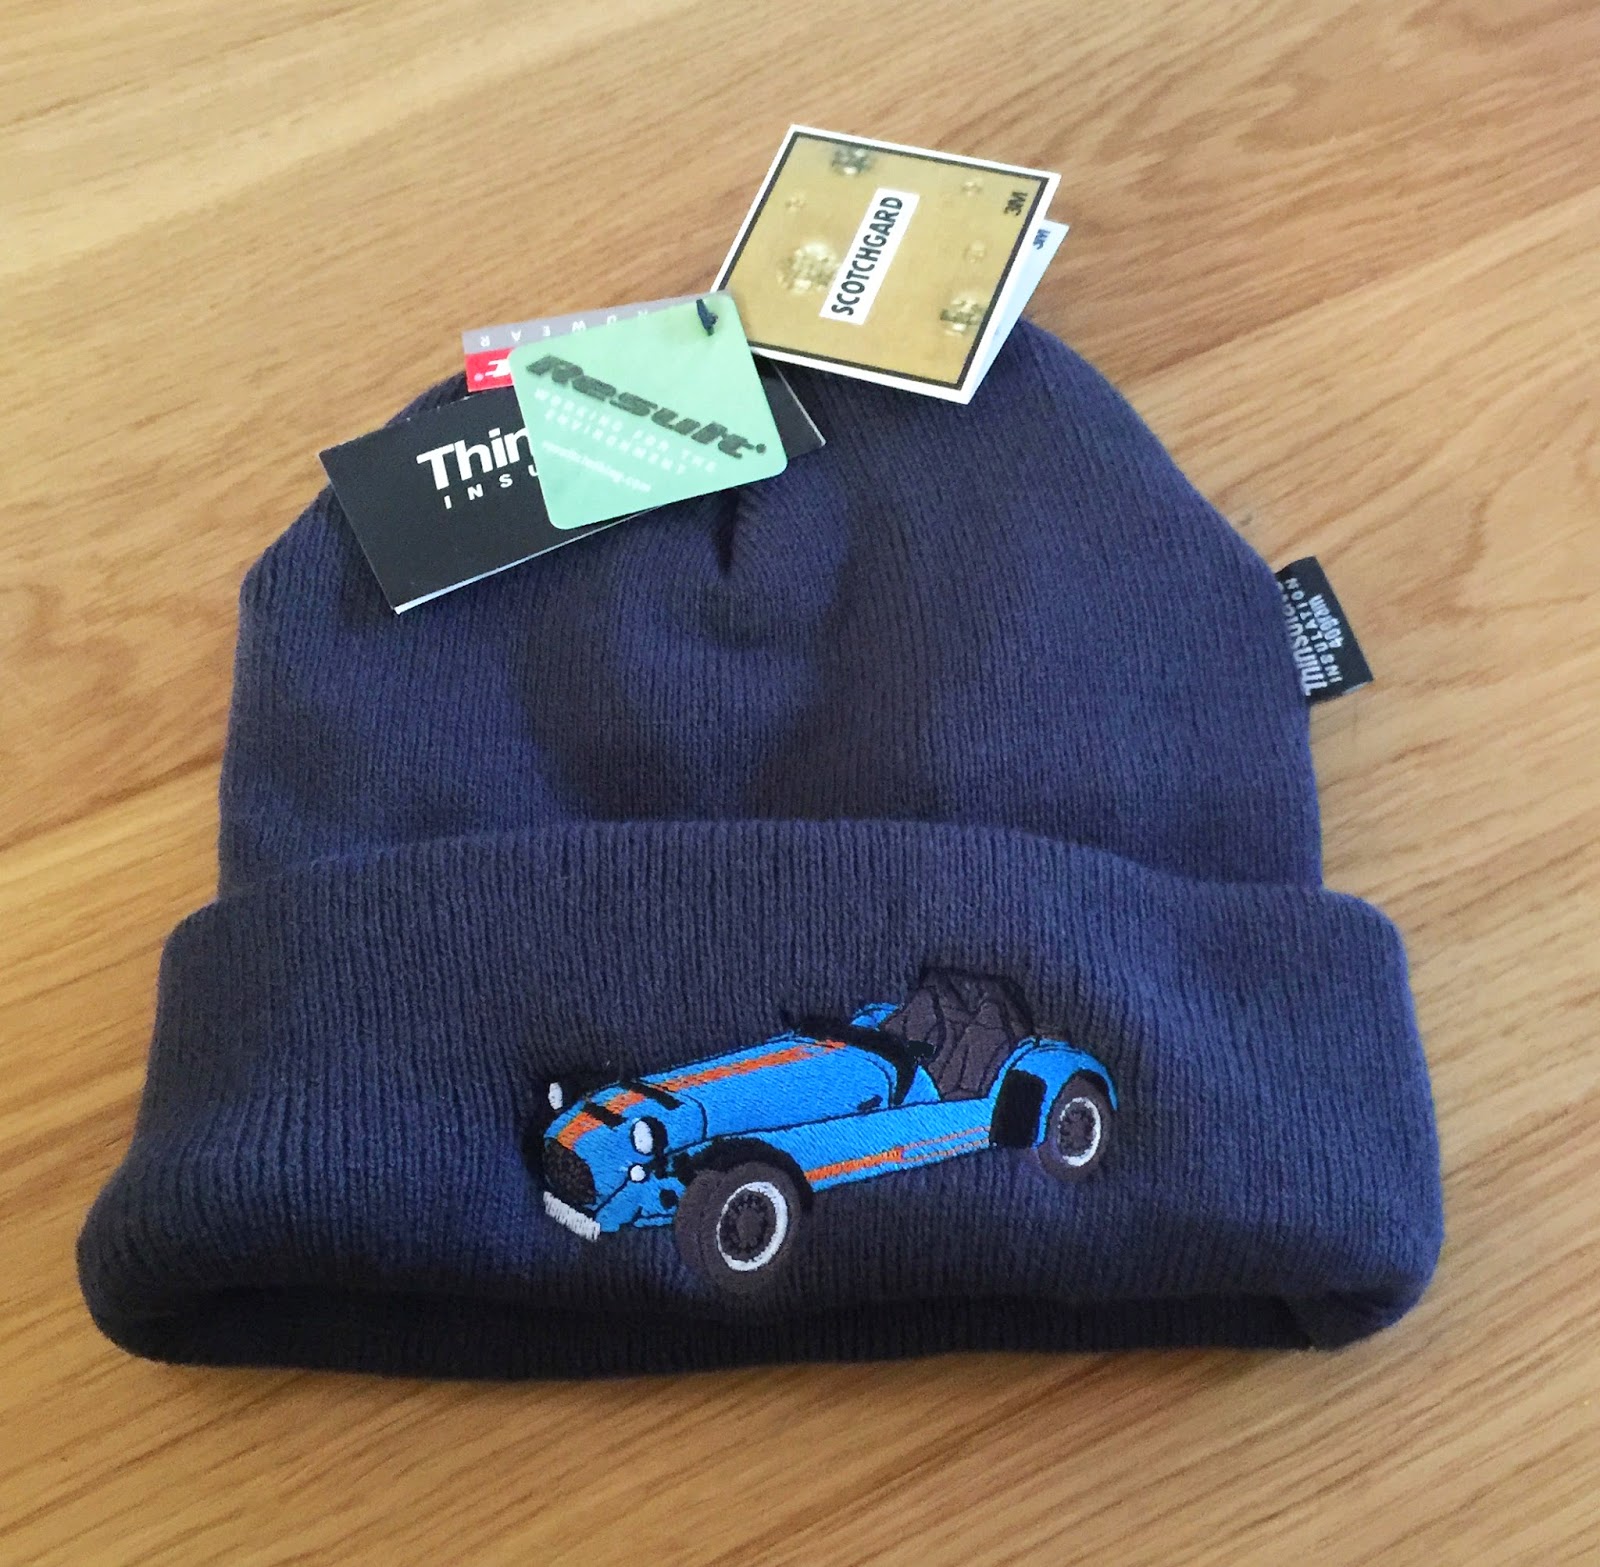 My new blat hat, with embroidered Caterham